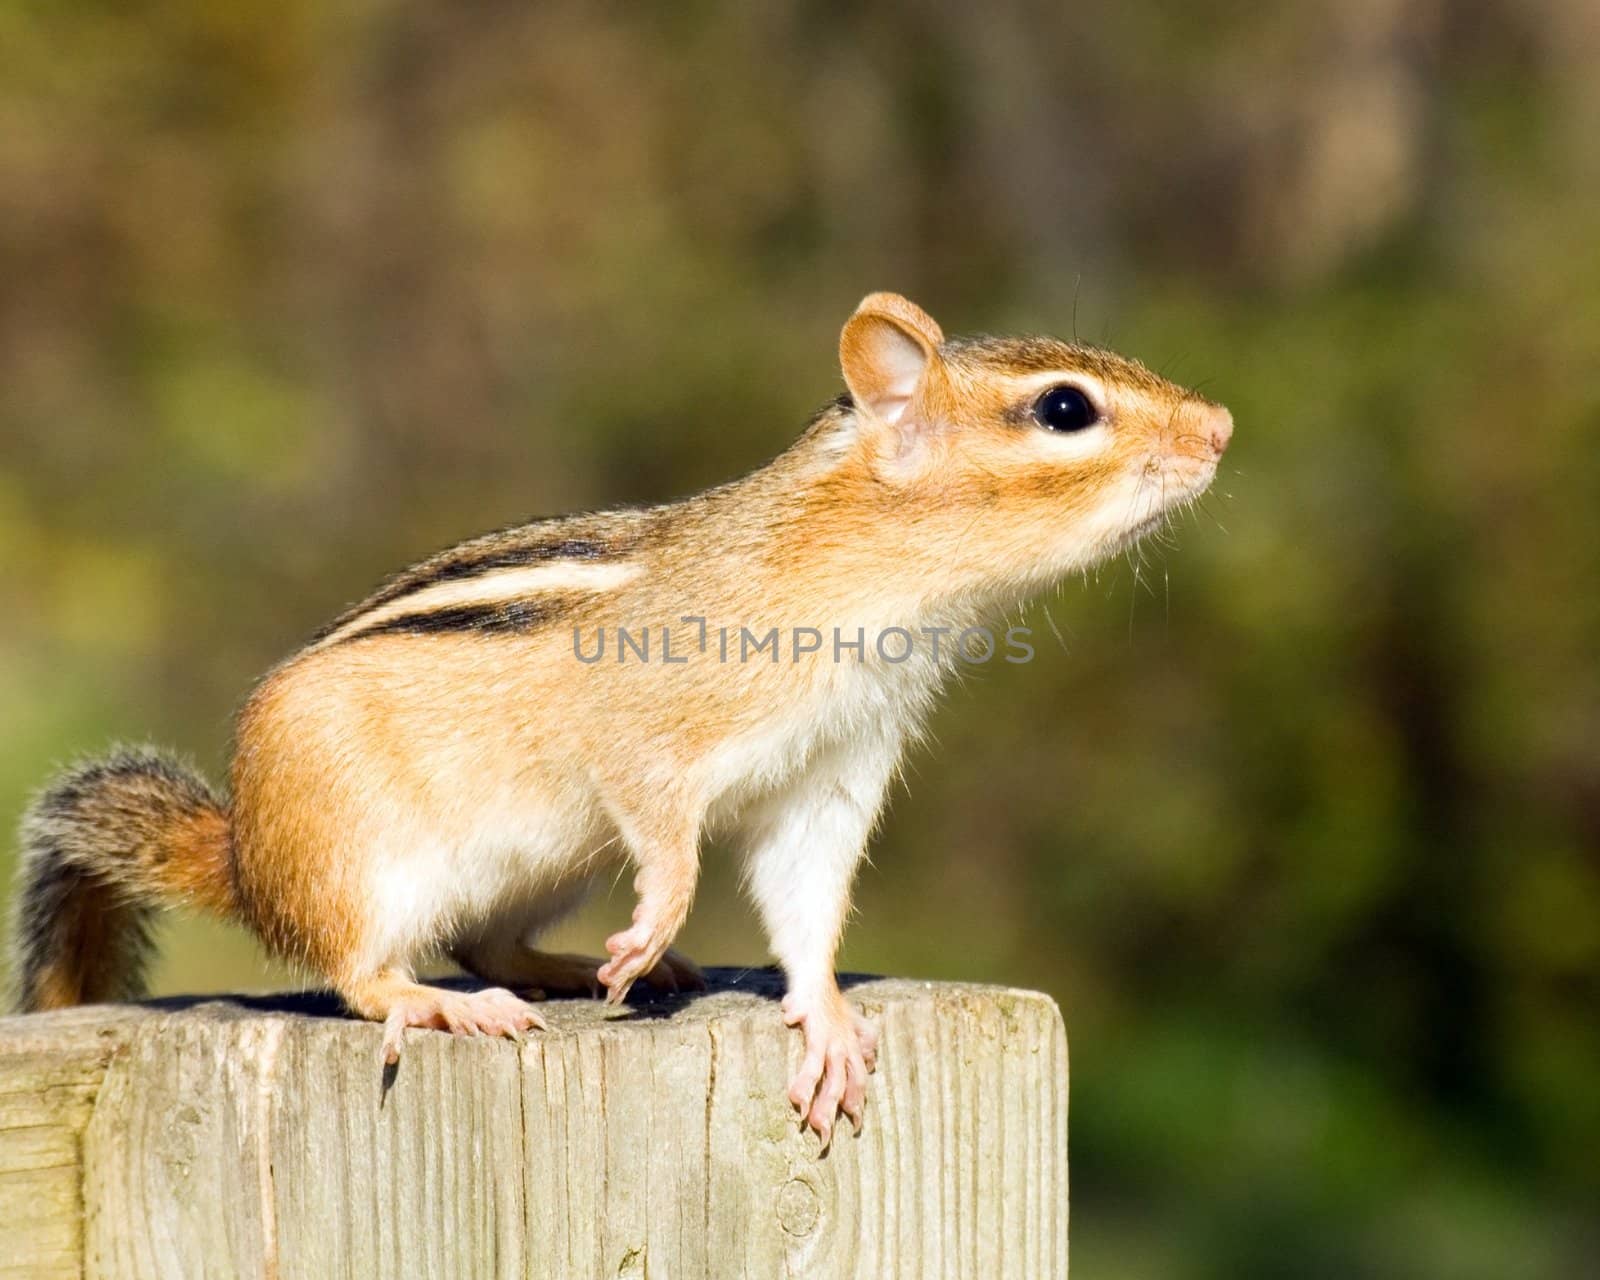 An eastern chipmunk looking around while perched on a wooden post.